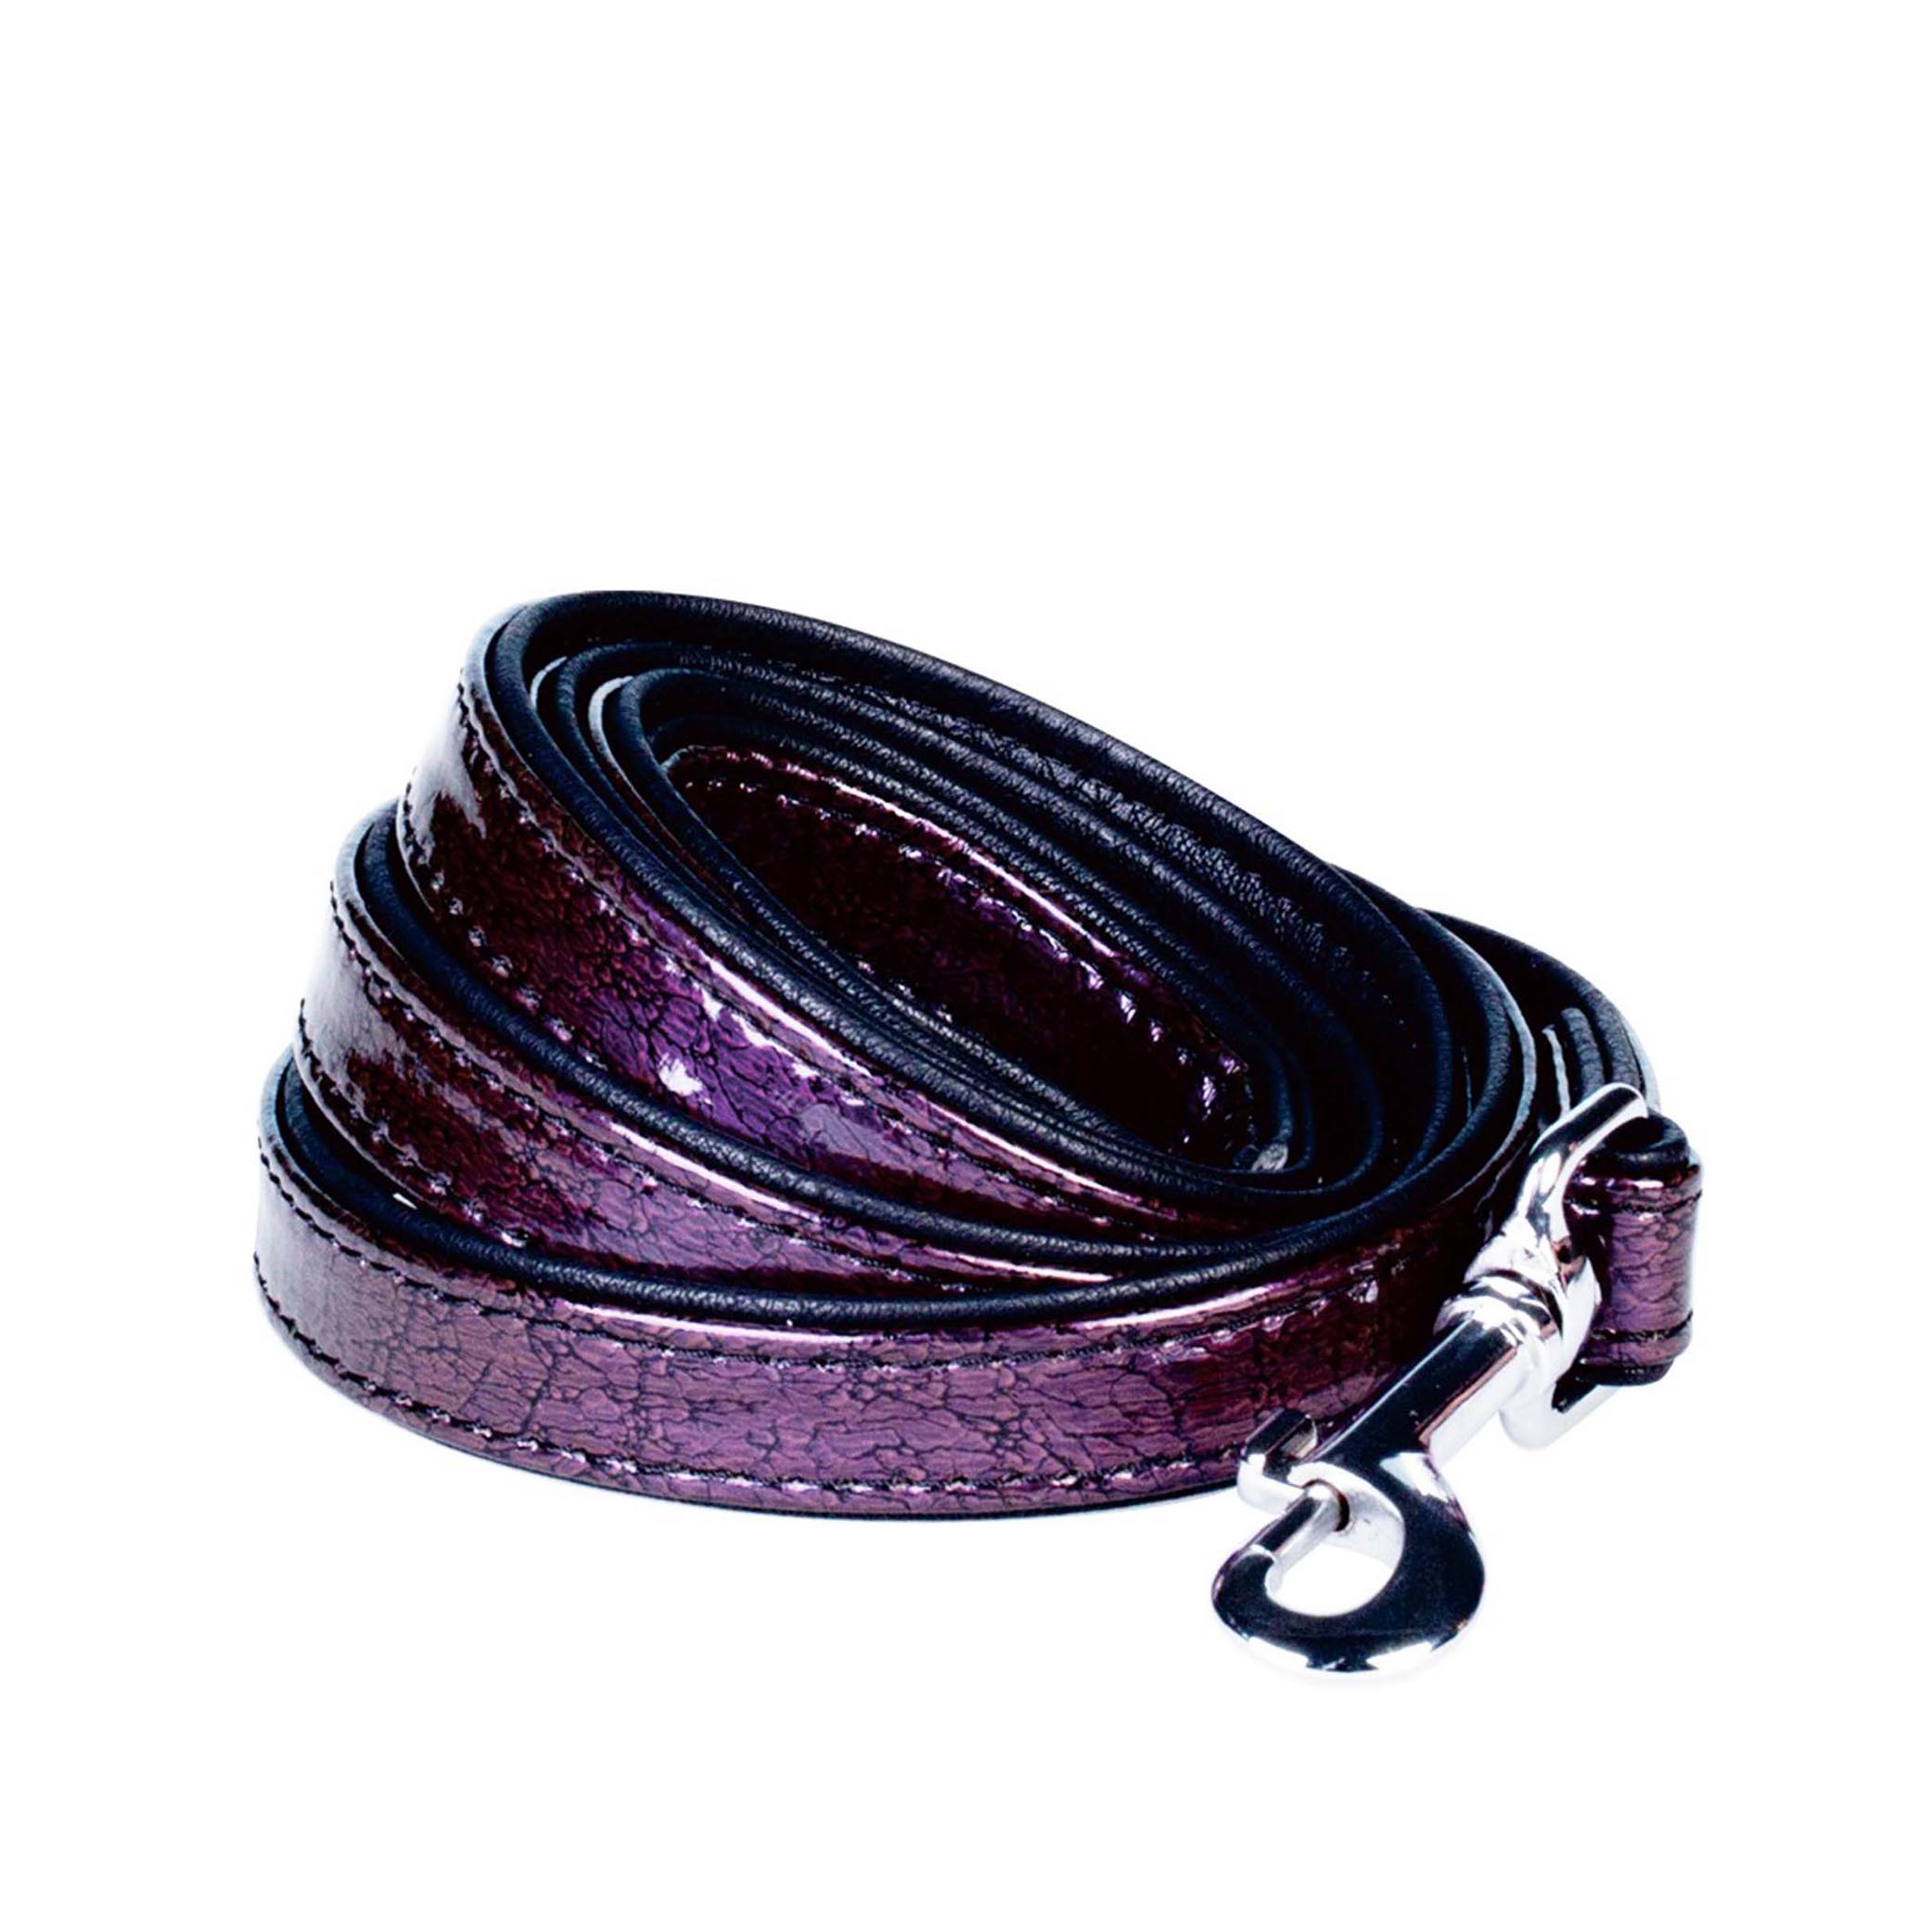 Faux Leather Snake Skin Print Embossed Dog Leashes